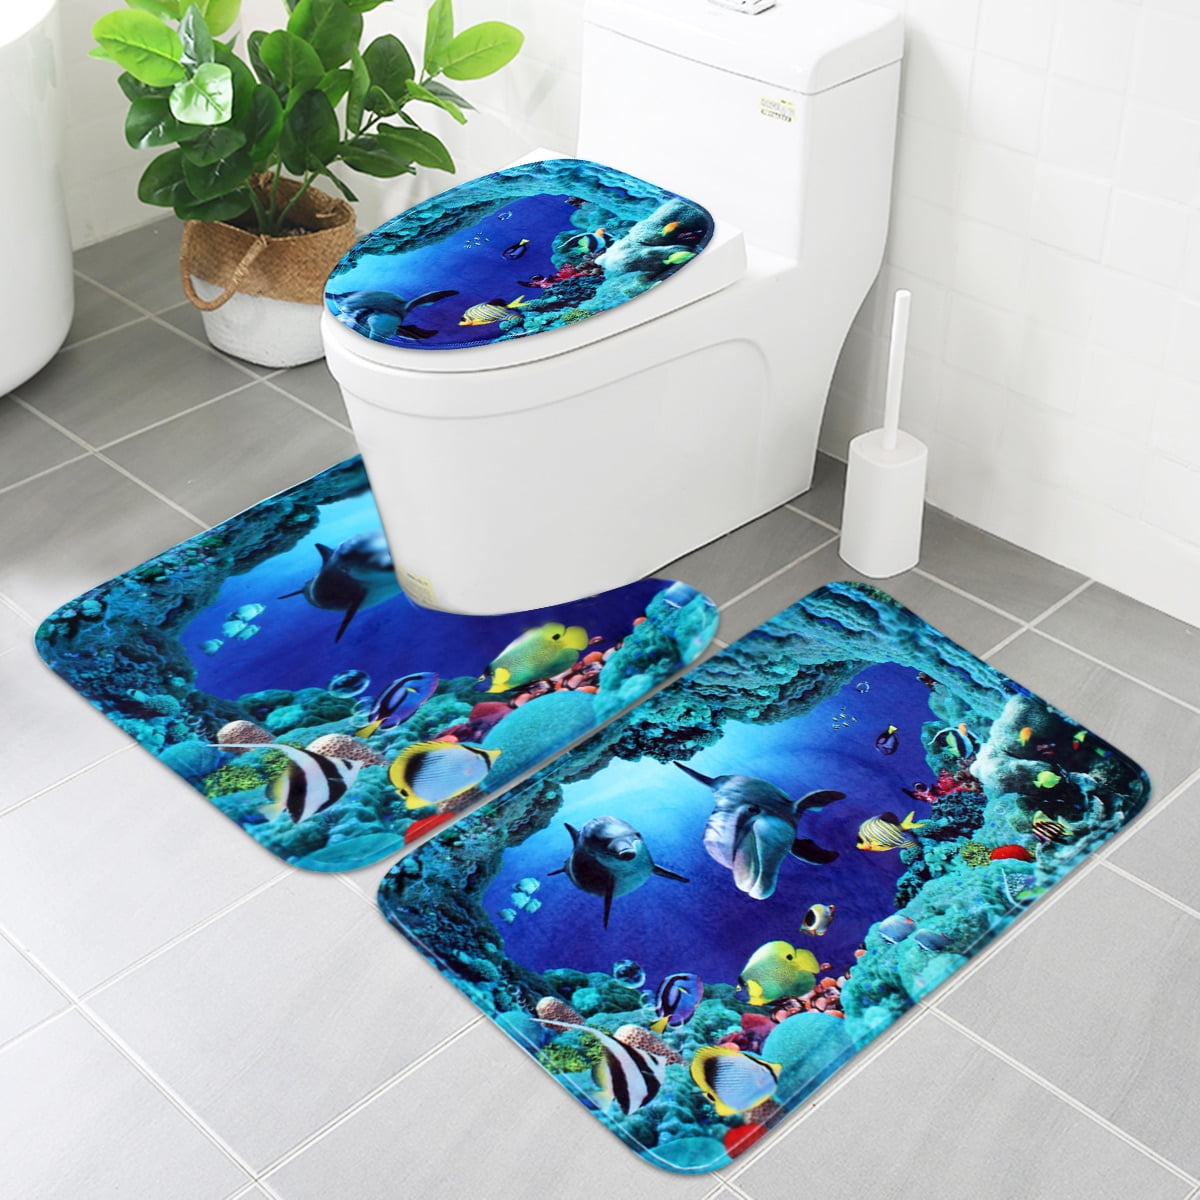 Toilet Lid Cover 3 Piece Bath Rug Sets Non Slip,Water Absorbent U-Shaped Contour Toilet Mat Christmas Party Beer Drink Brown and Green Bathroom Mats Set for Christmas Decorations